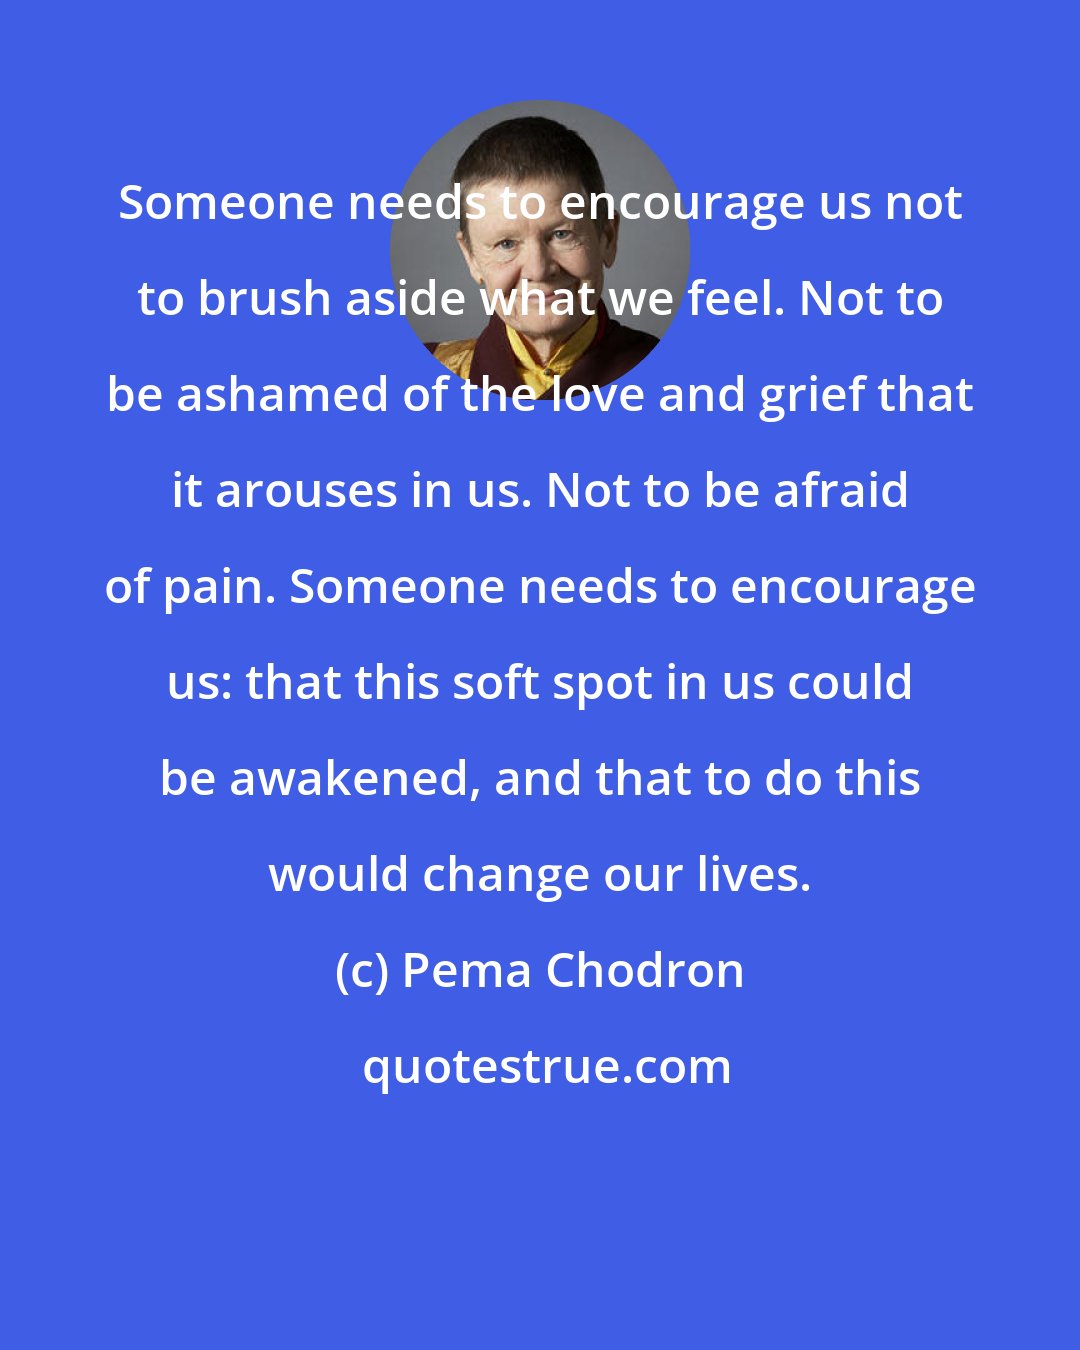 Pema Chodron: Someone needs to encourage us not to brush aside what we feel. Not to be ashamed of the love and grief that it arouses in us. Not to be afraid of pain. Someone needs to encourage us: that this soft spot in us could be awakened, and that to do this would change our lives.